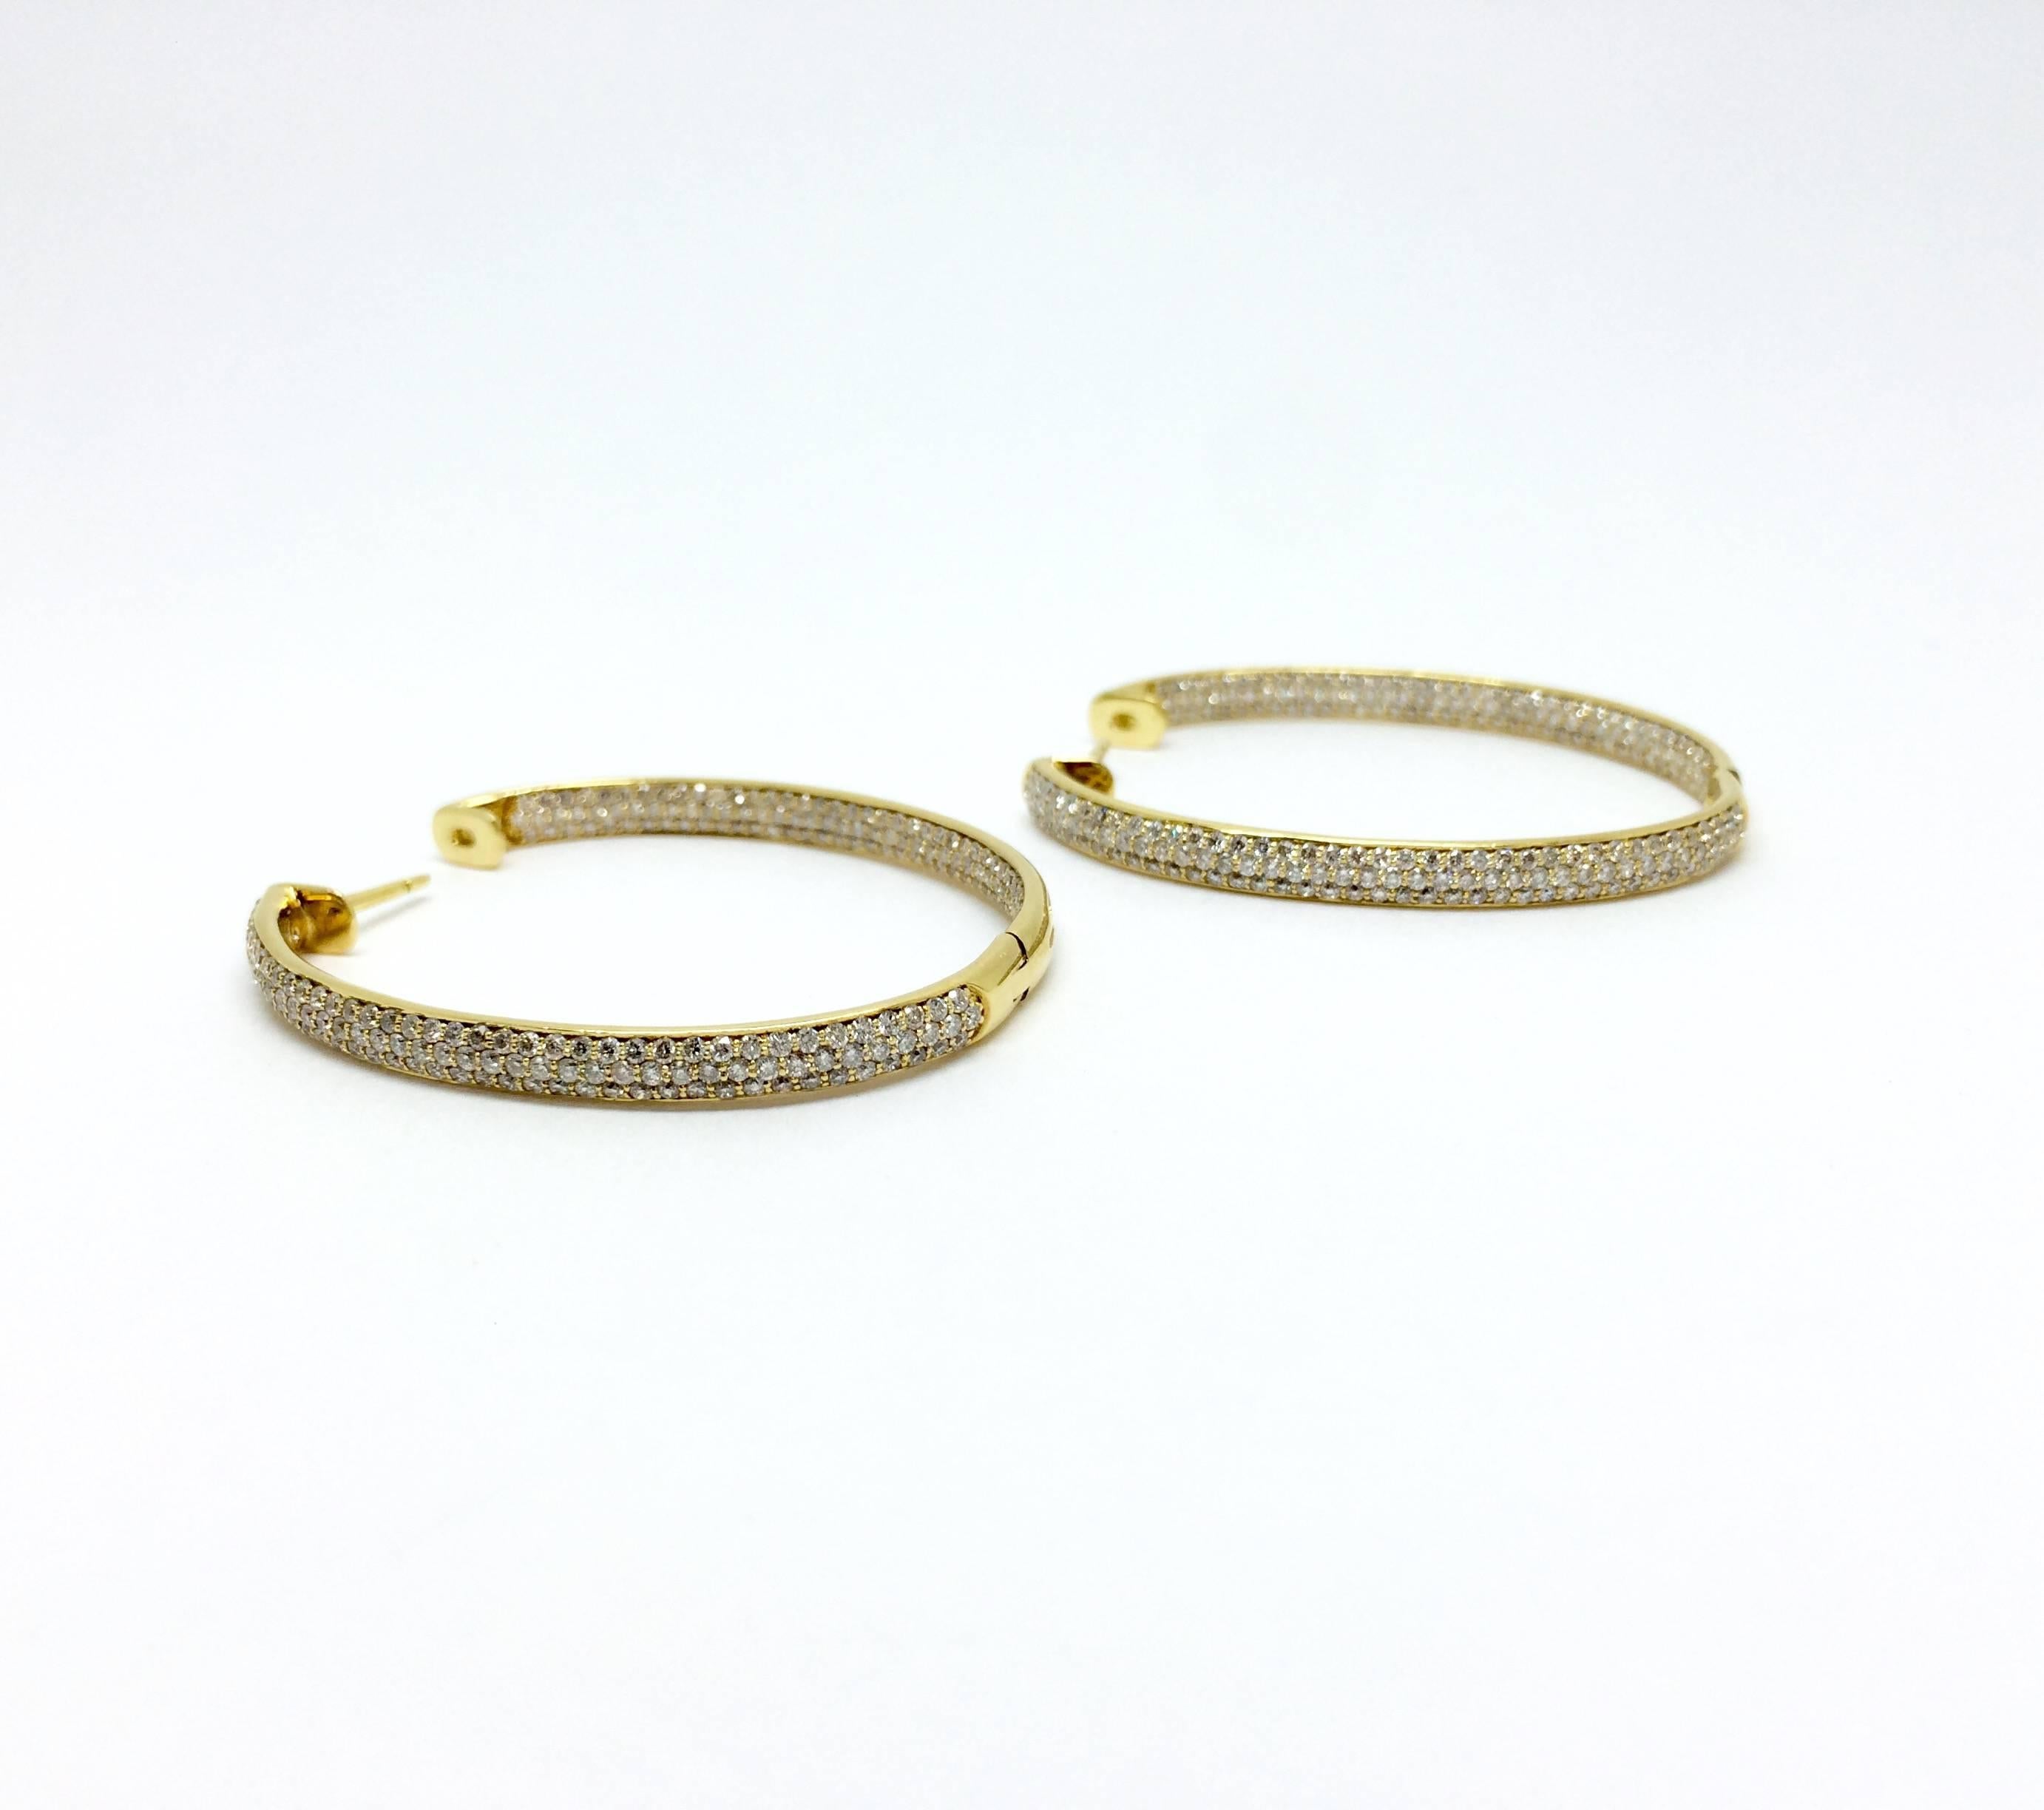 Hoop style earrings in 18k yellow gold with pave set round brilliant cut diamonds. Carat total weight approximately 2.24.